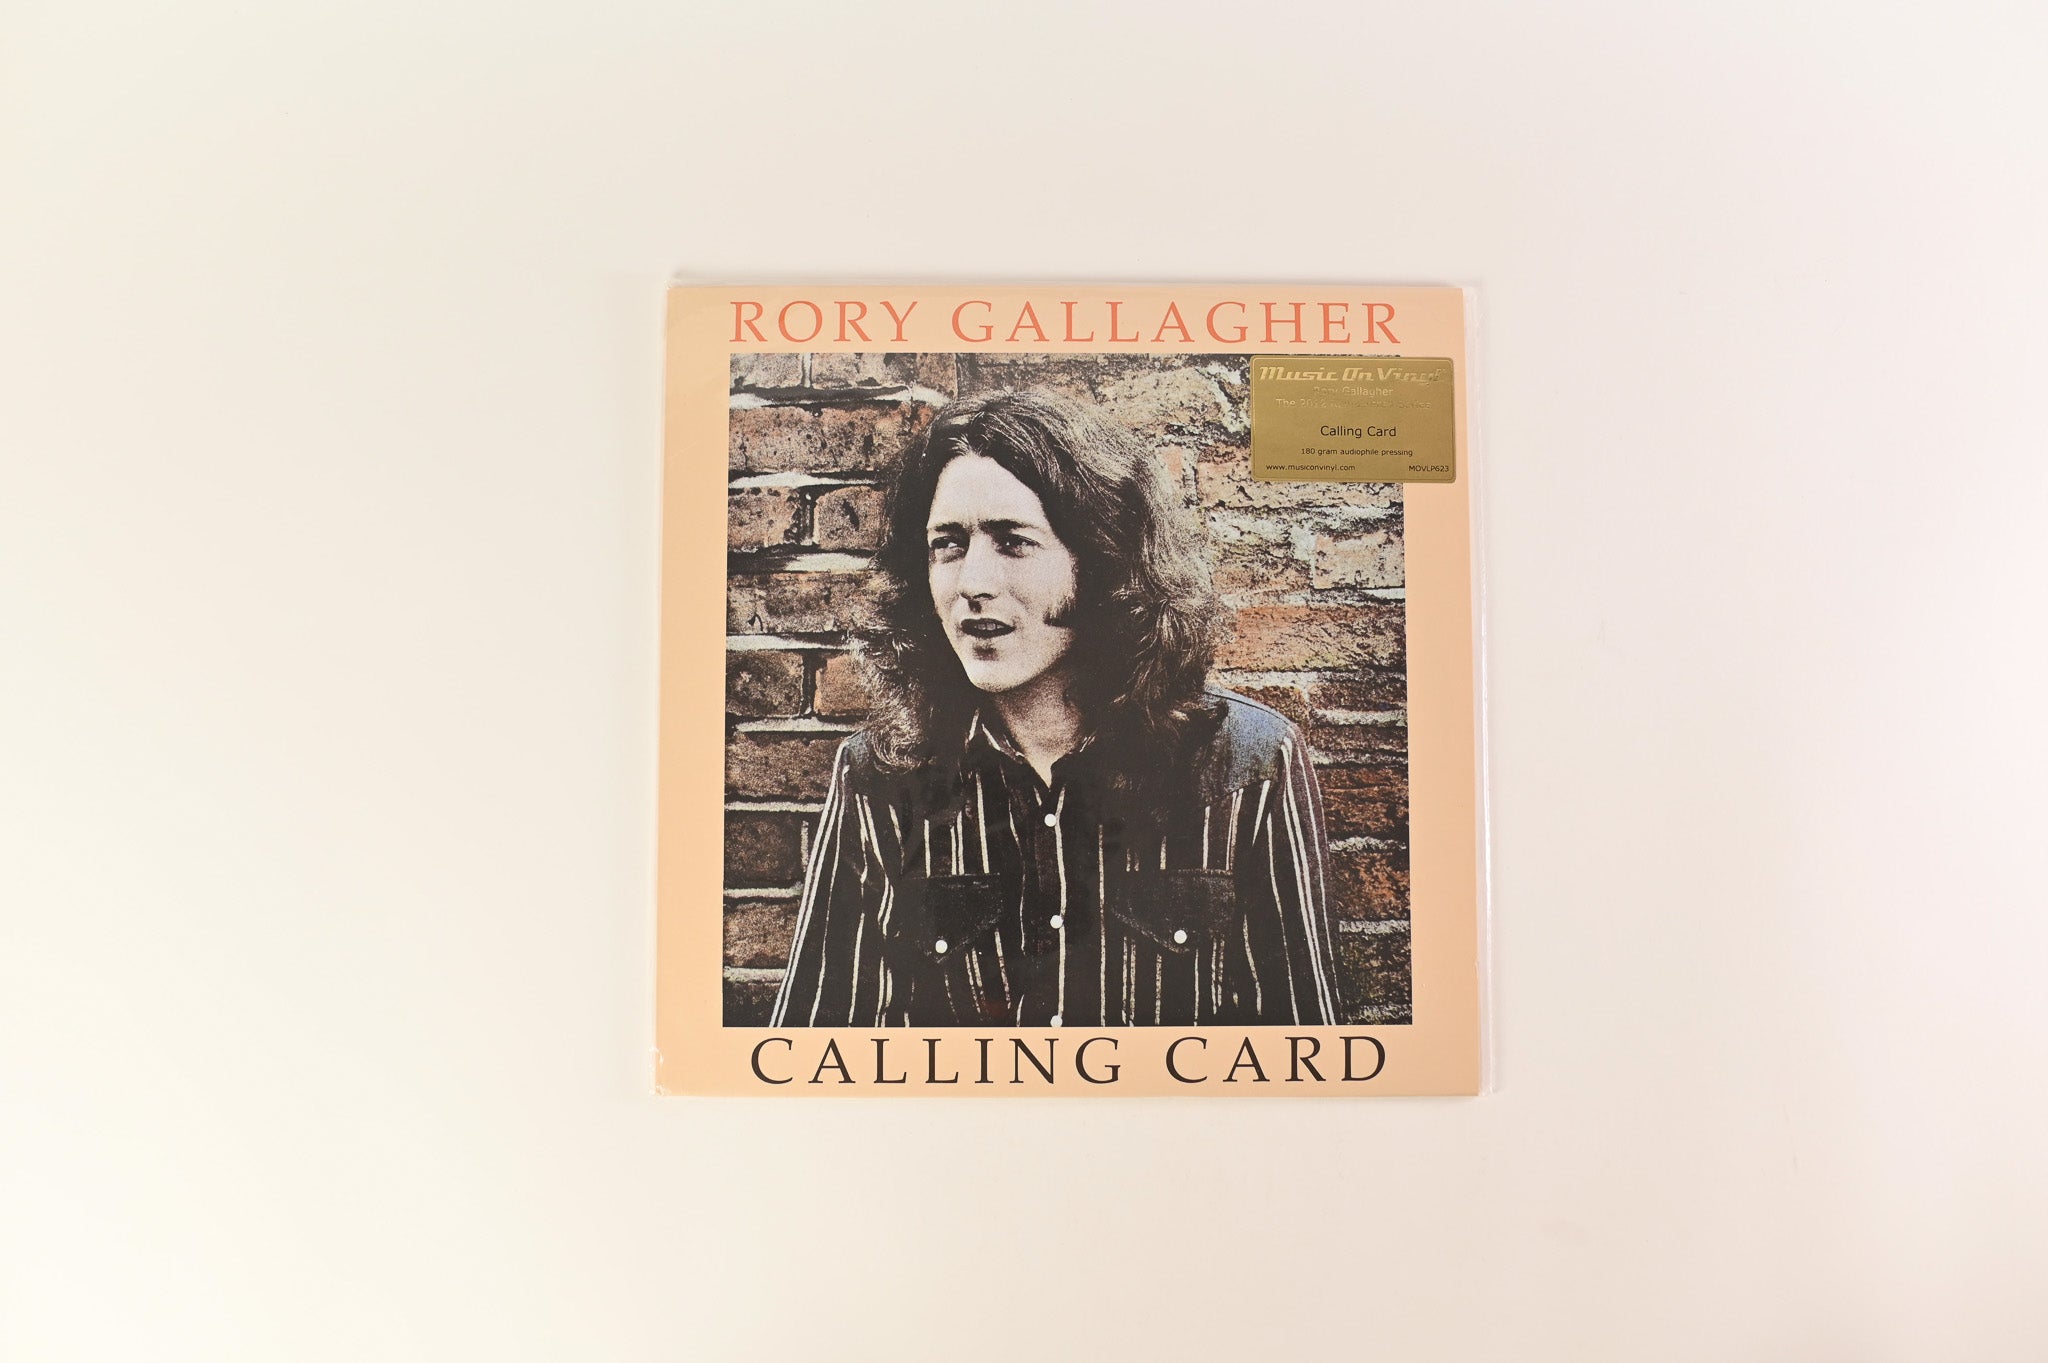 Rory Gallagher - Calling Card on Music On Vinyl